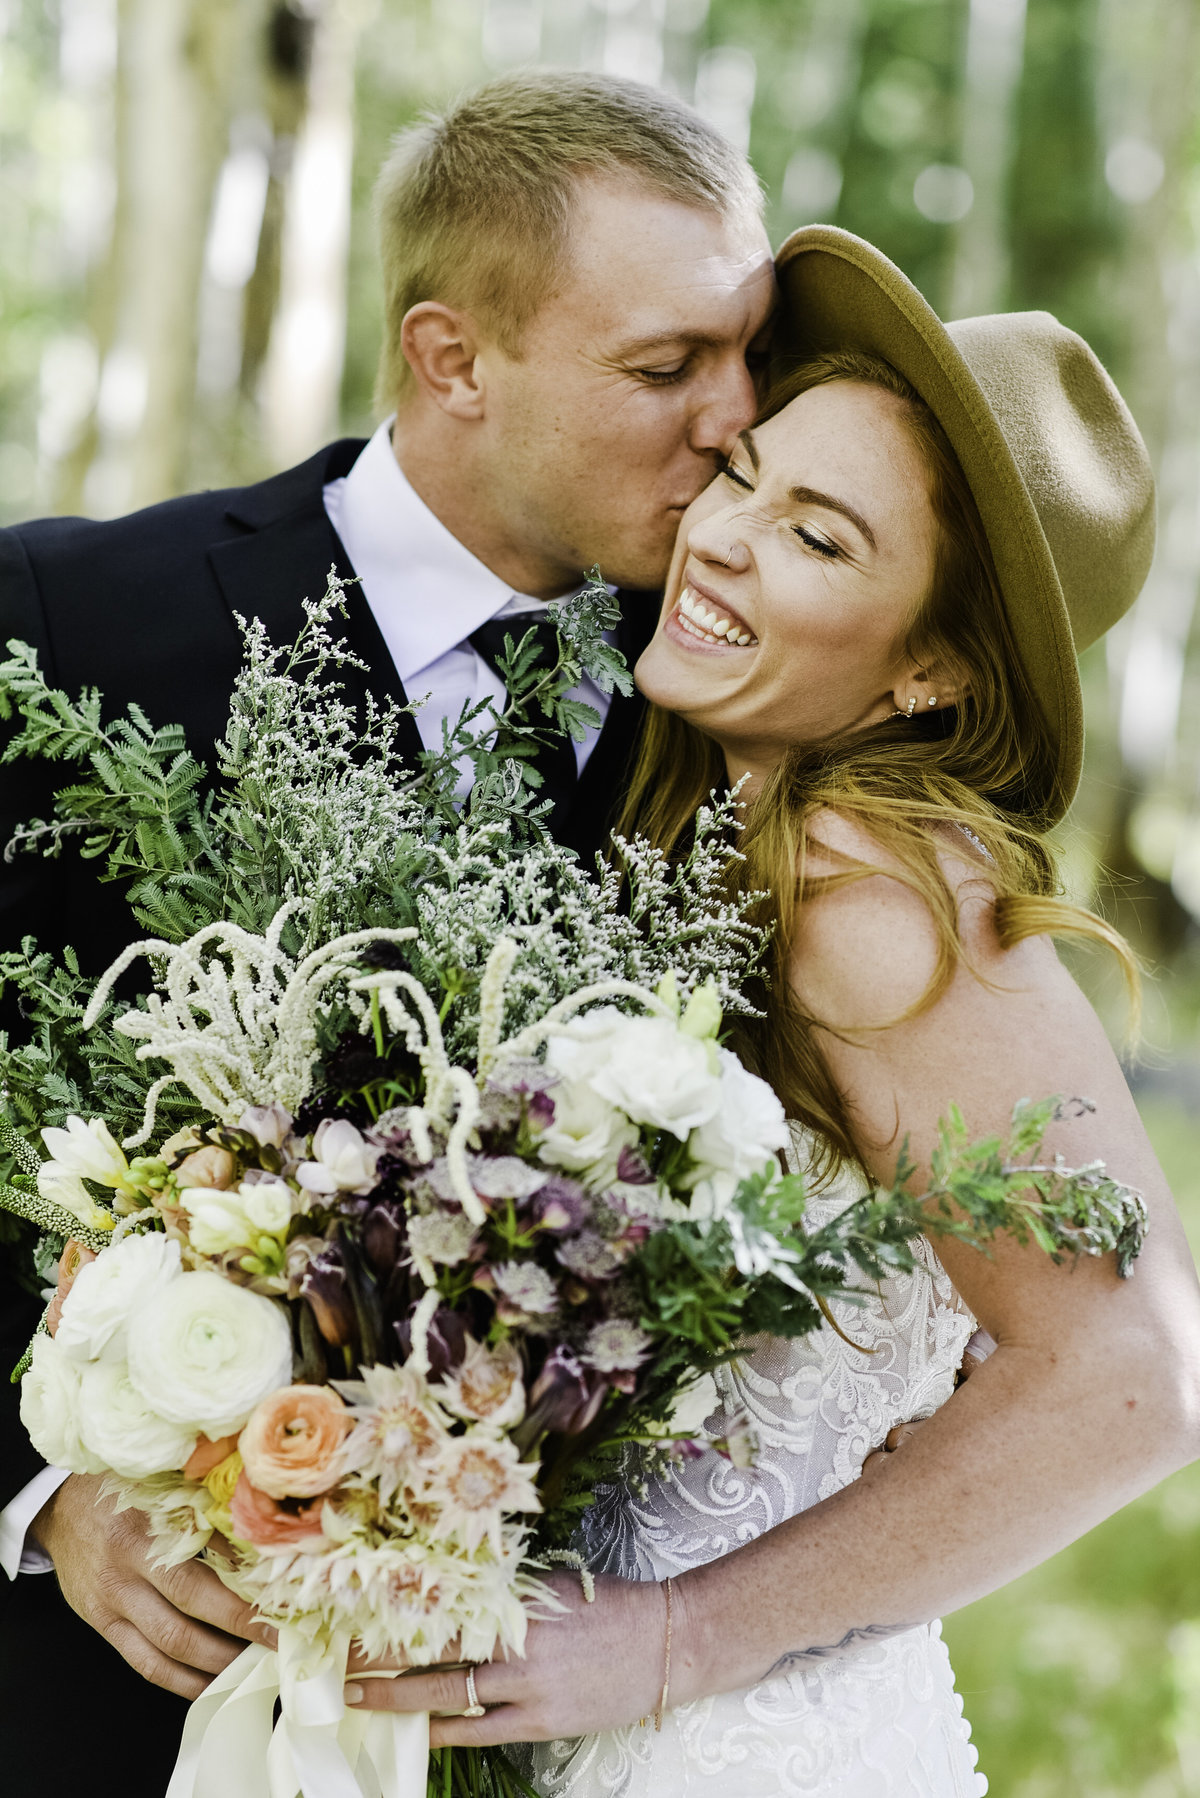 Groom kissing bride wearing hat and holding bouquet wedding Flagstaff aspens